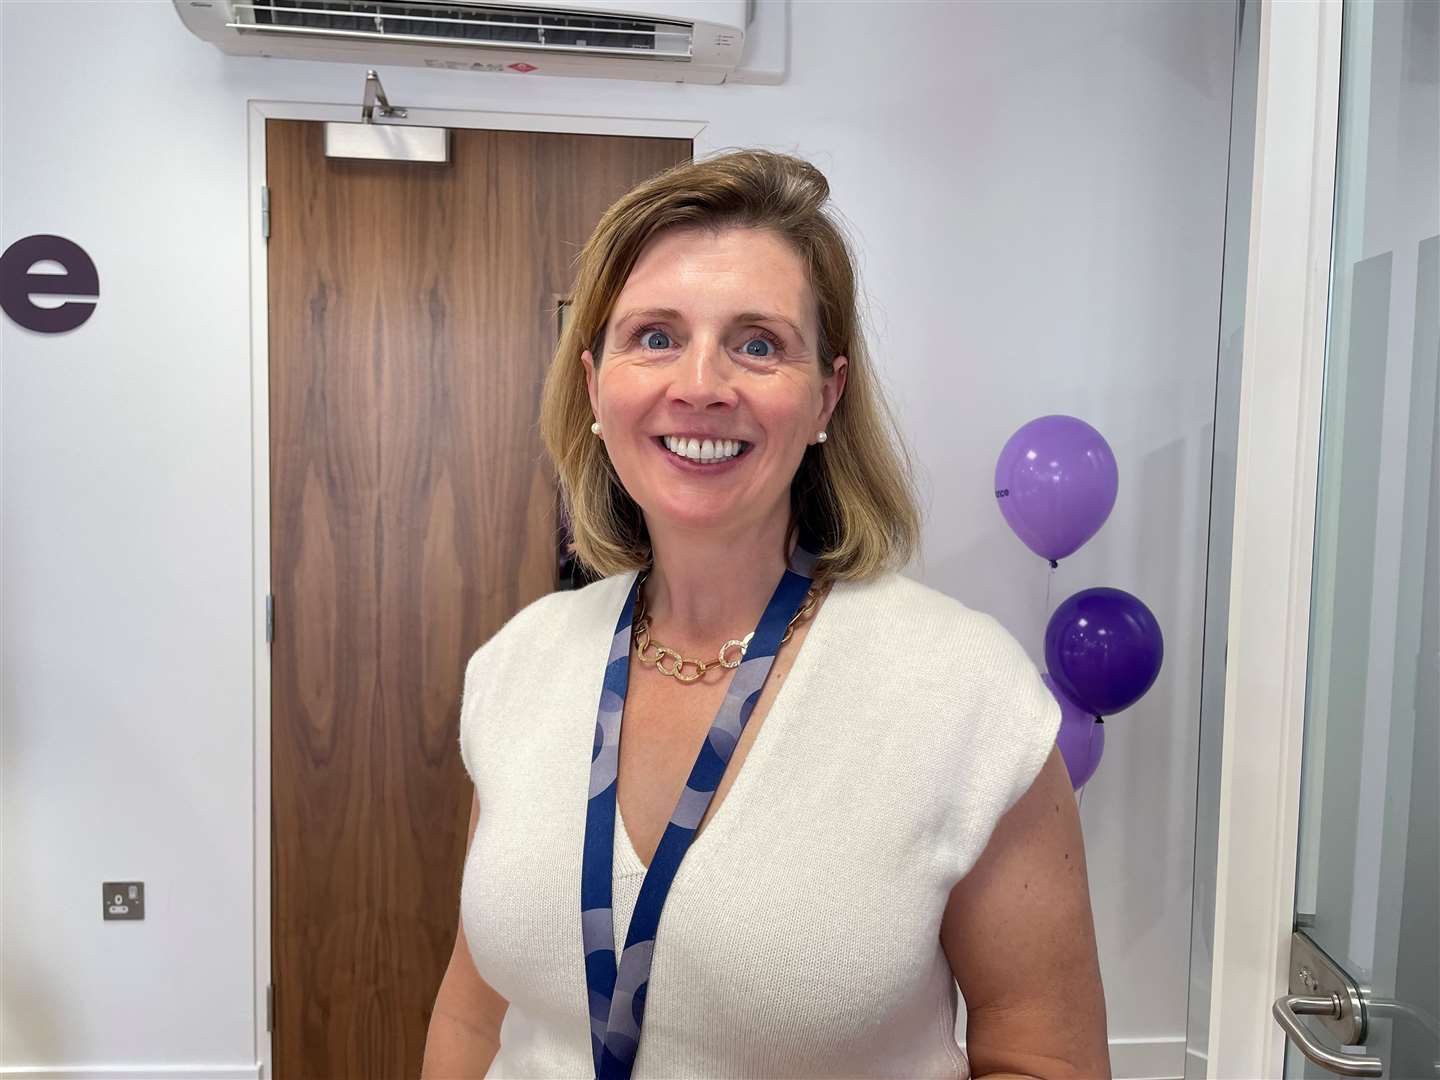 Savings director Louise Halliwell said customers crave face-to-face services